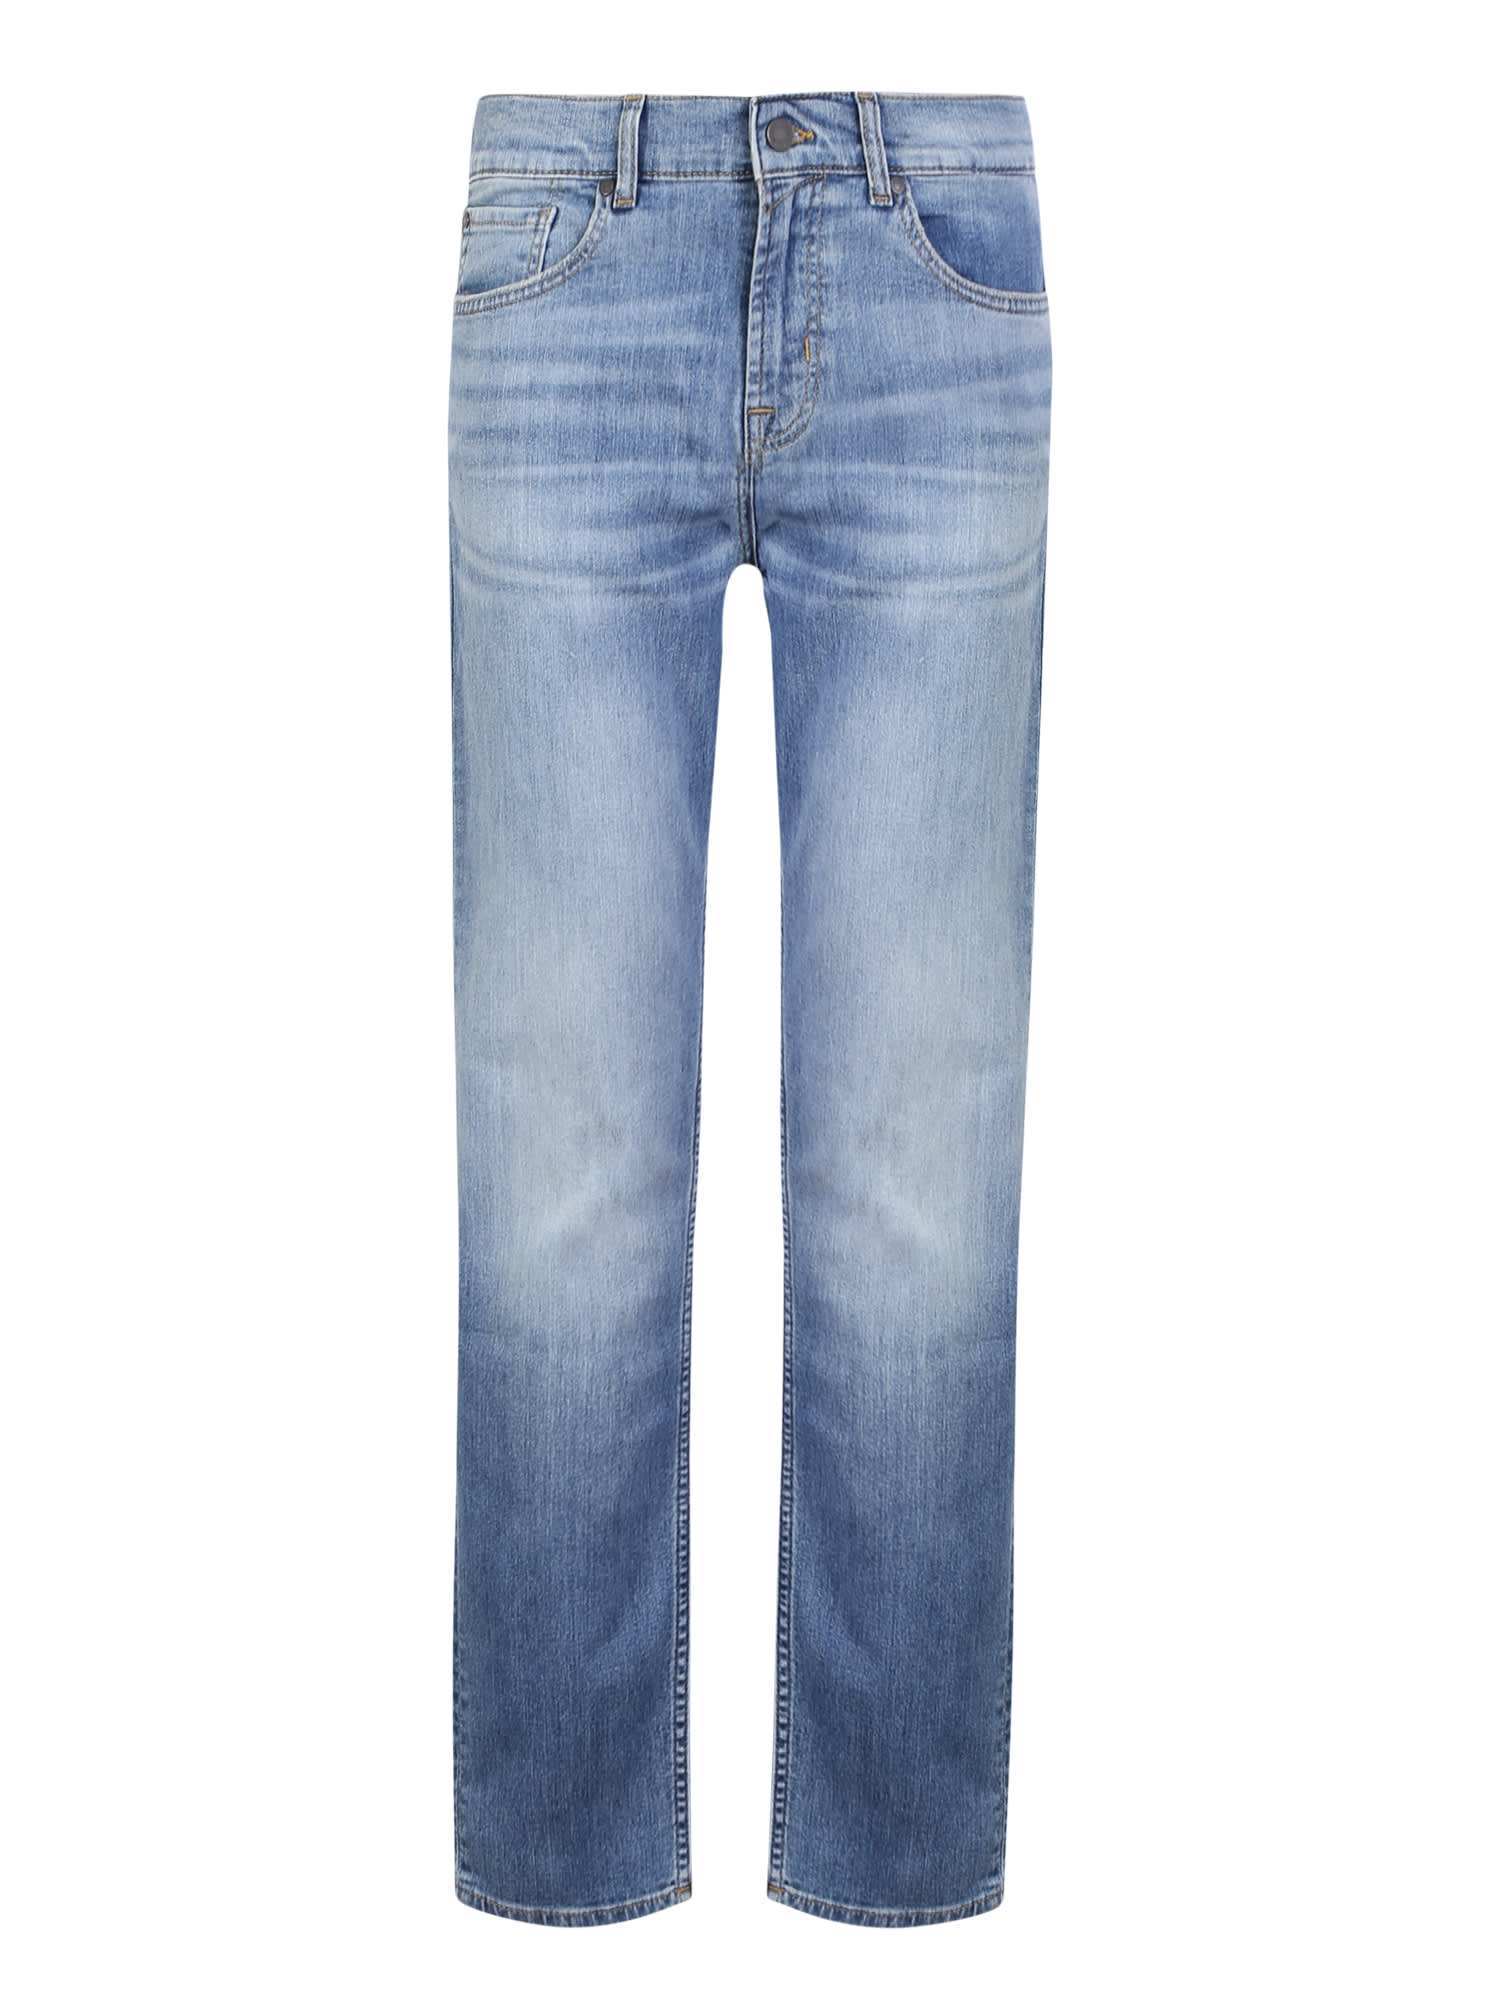 7 FOR ALL MANKIND STRAIGHT LIGHT-BLUE JEANS